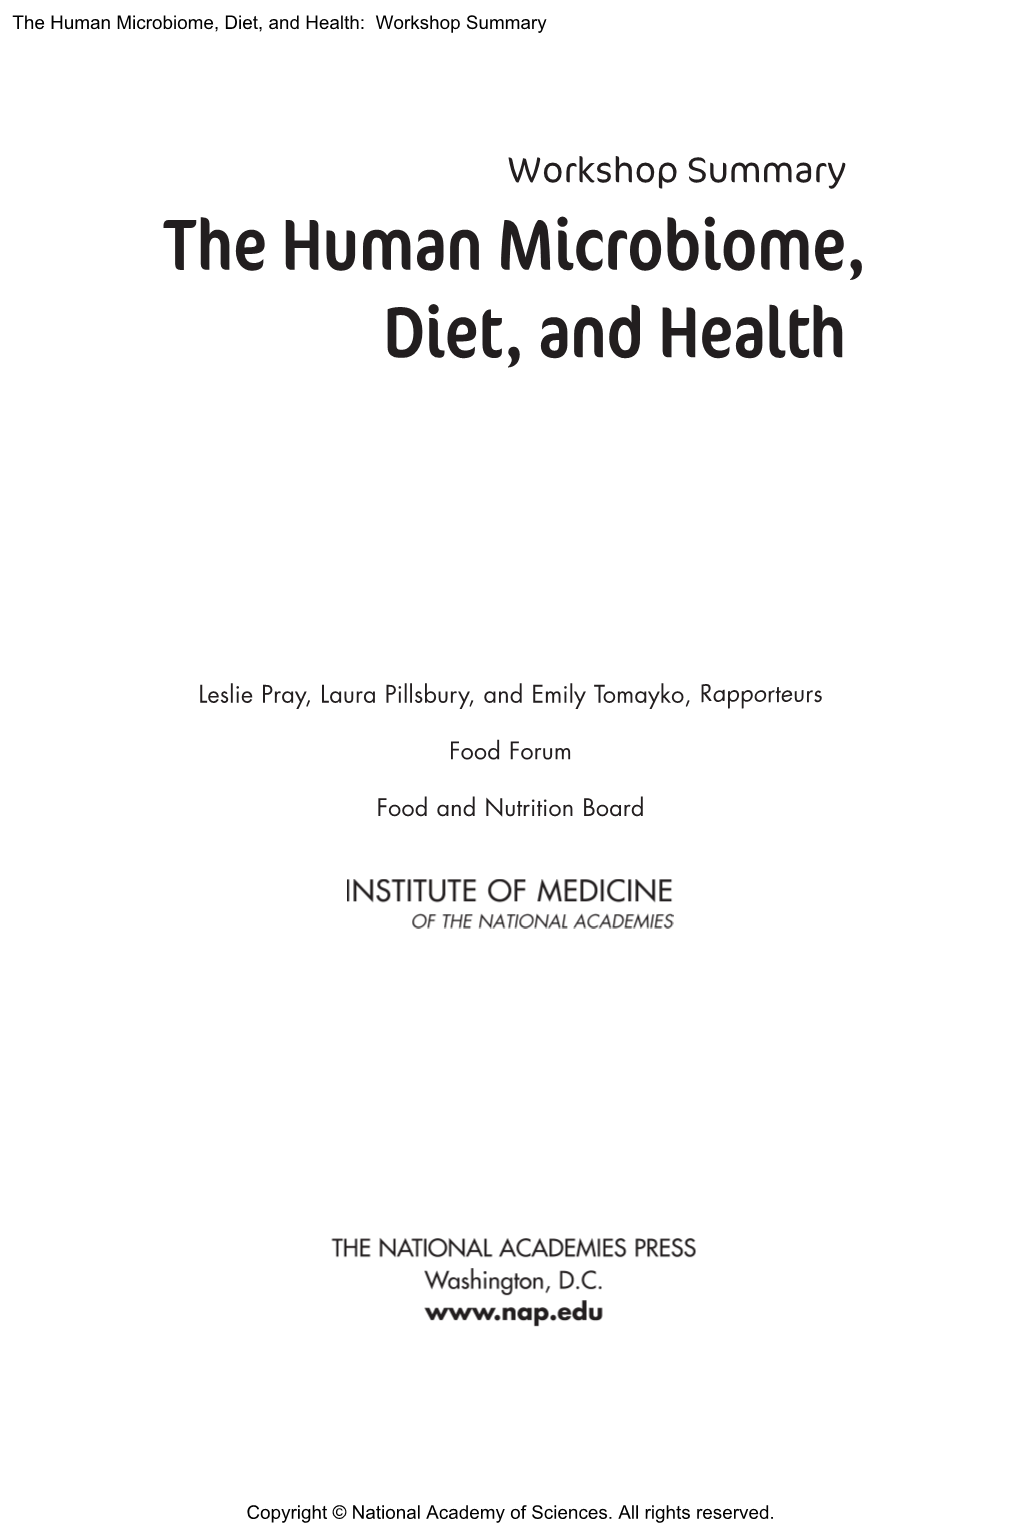 The Human Microbiome, Diet, and Health: Workshop Summary